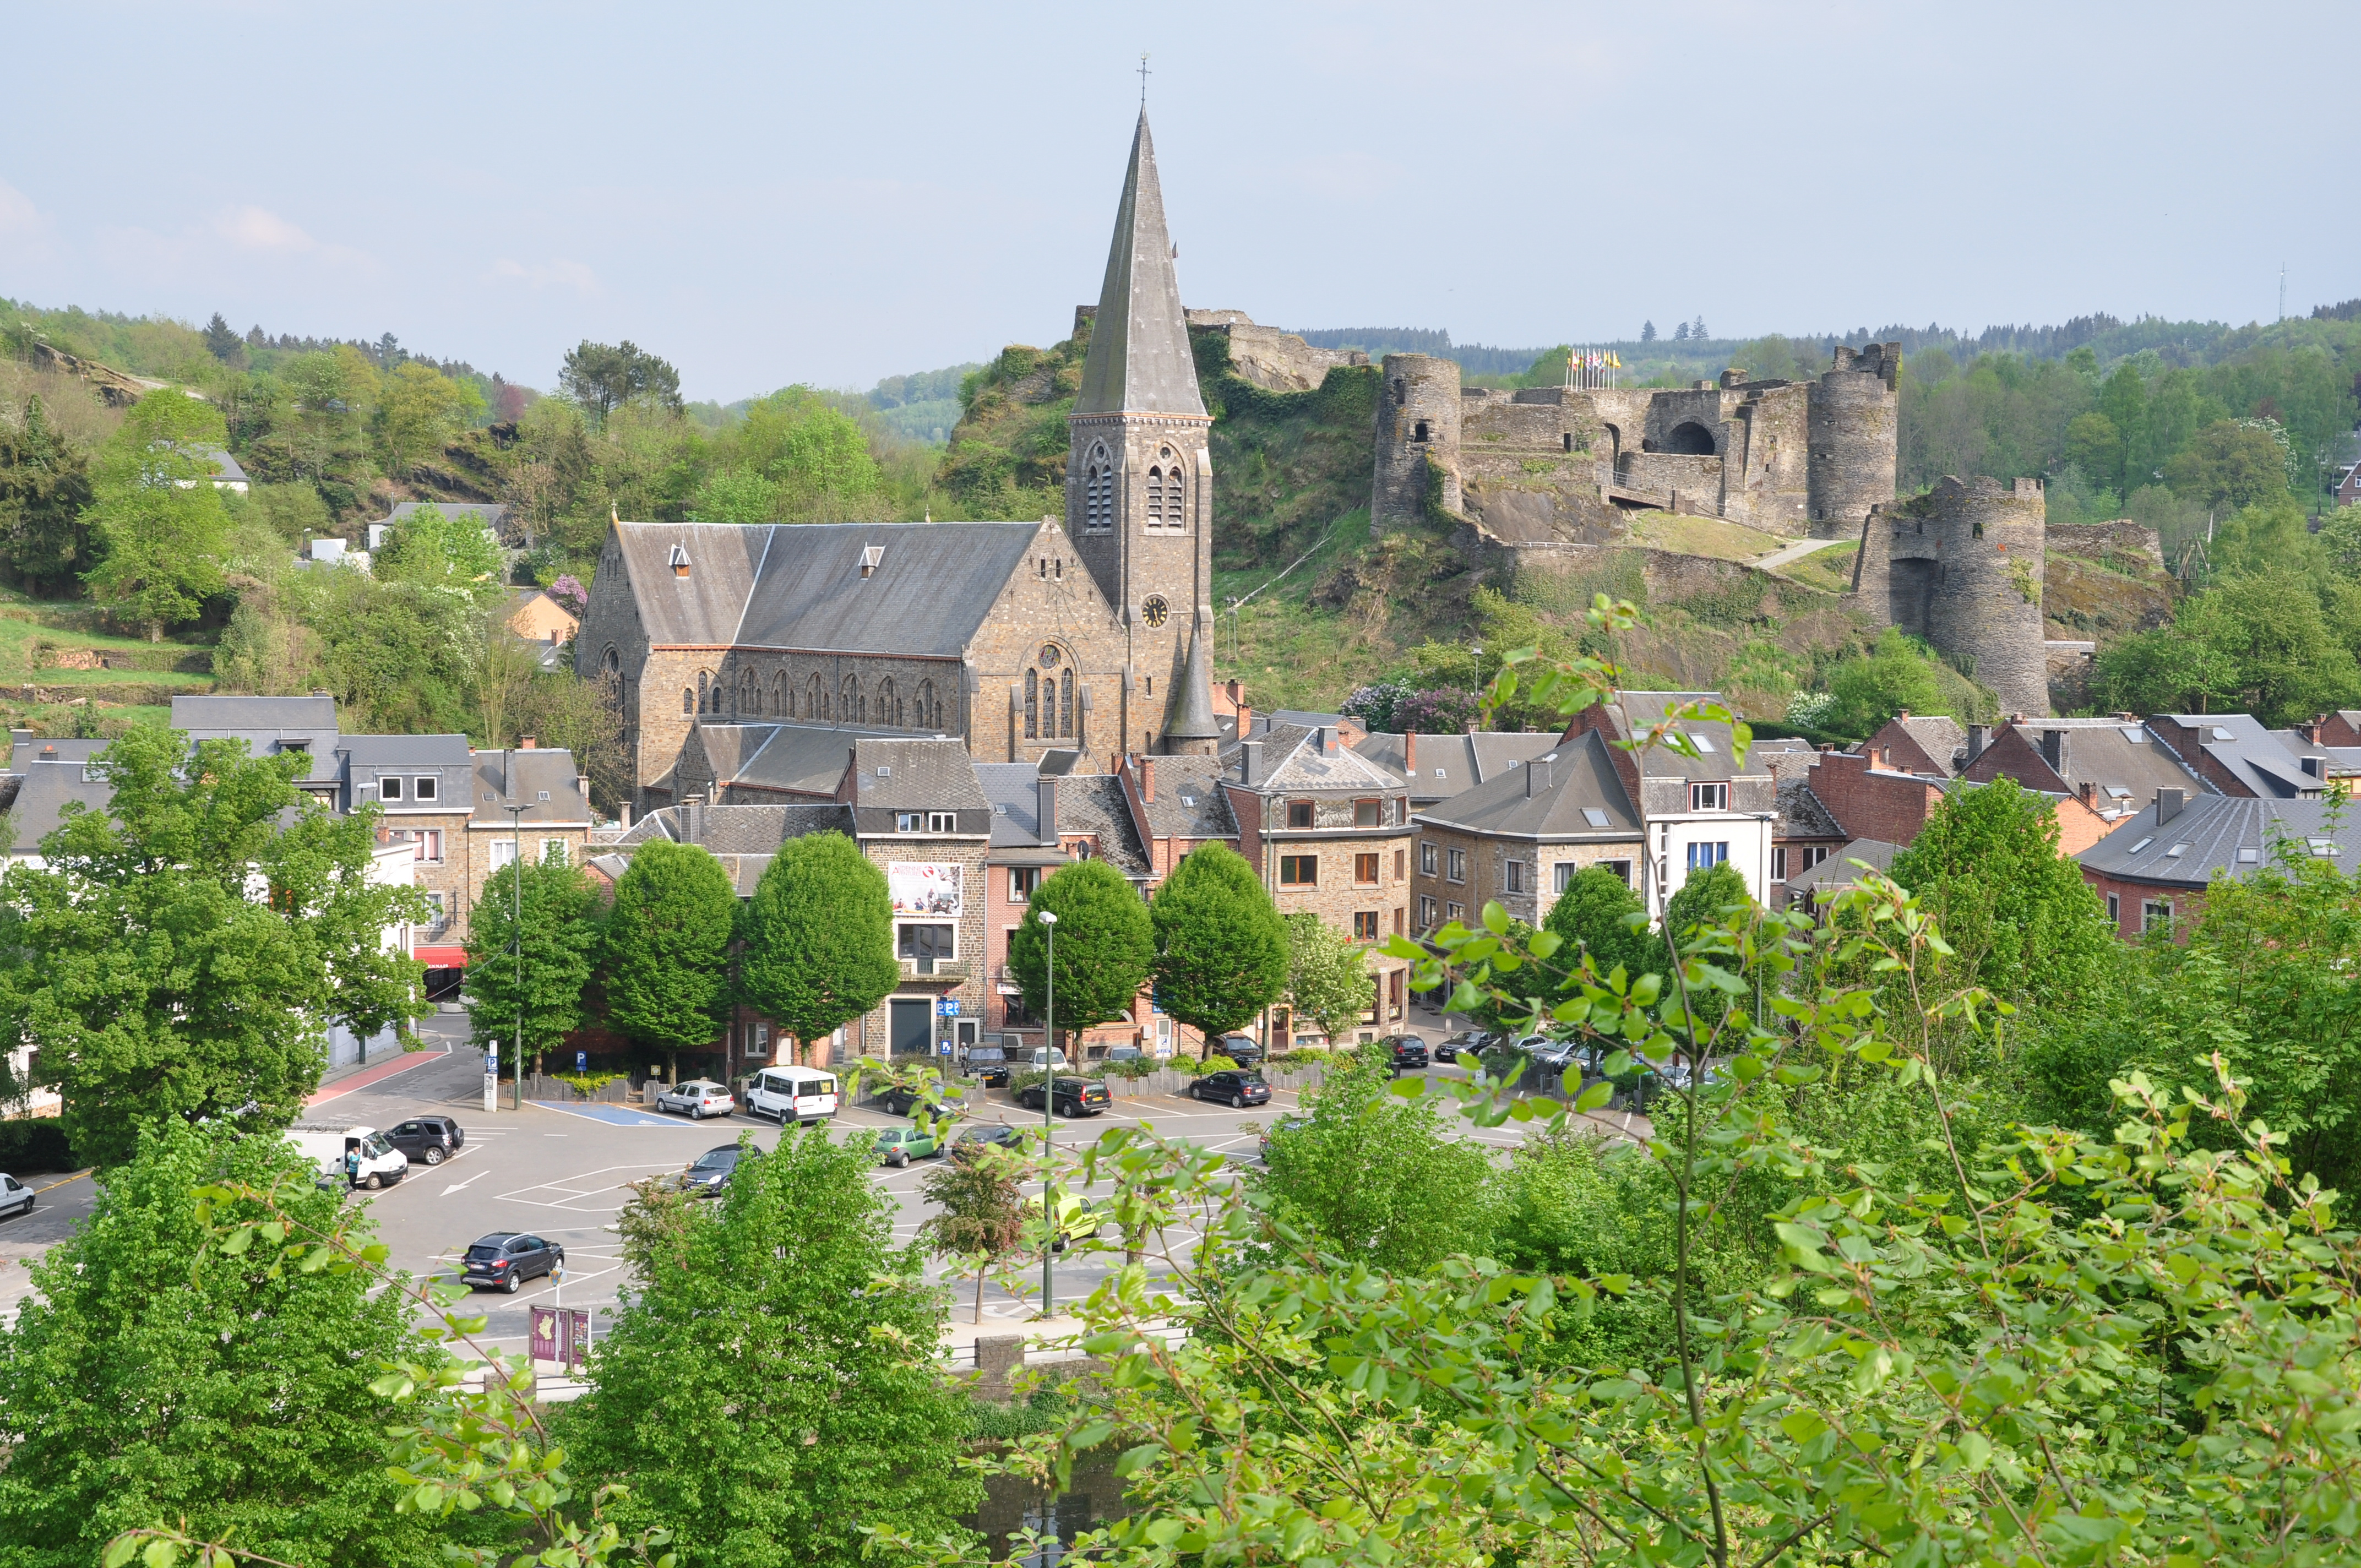 Discover the magnificent castle of La Roche-en-Ardenne in Luxembourg province